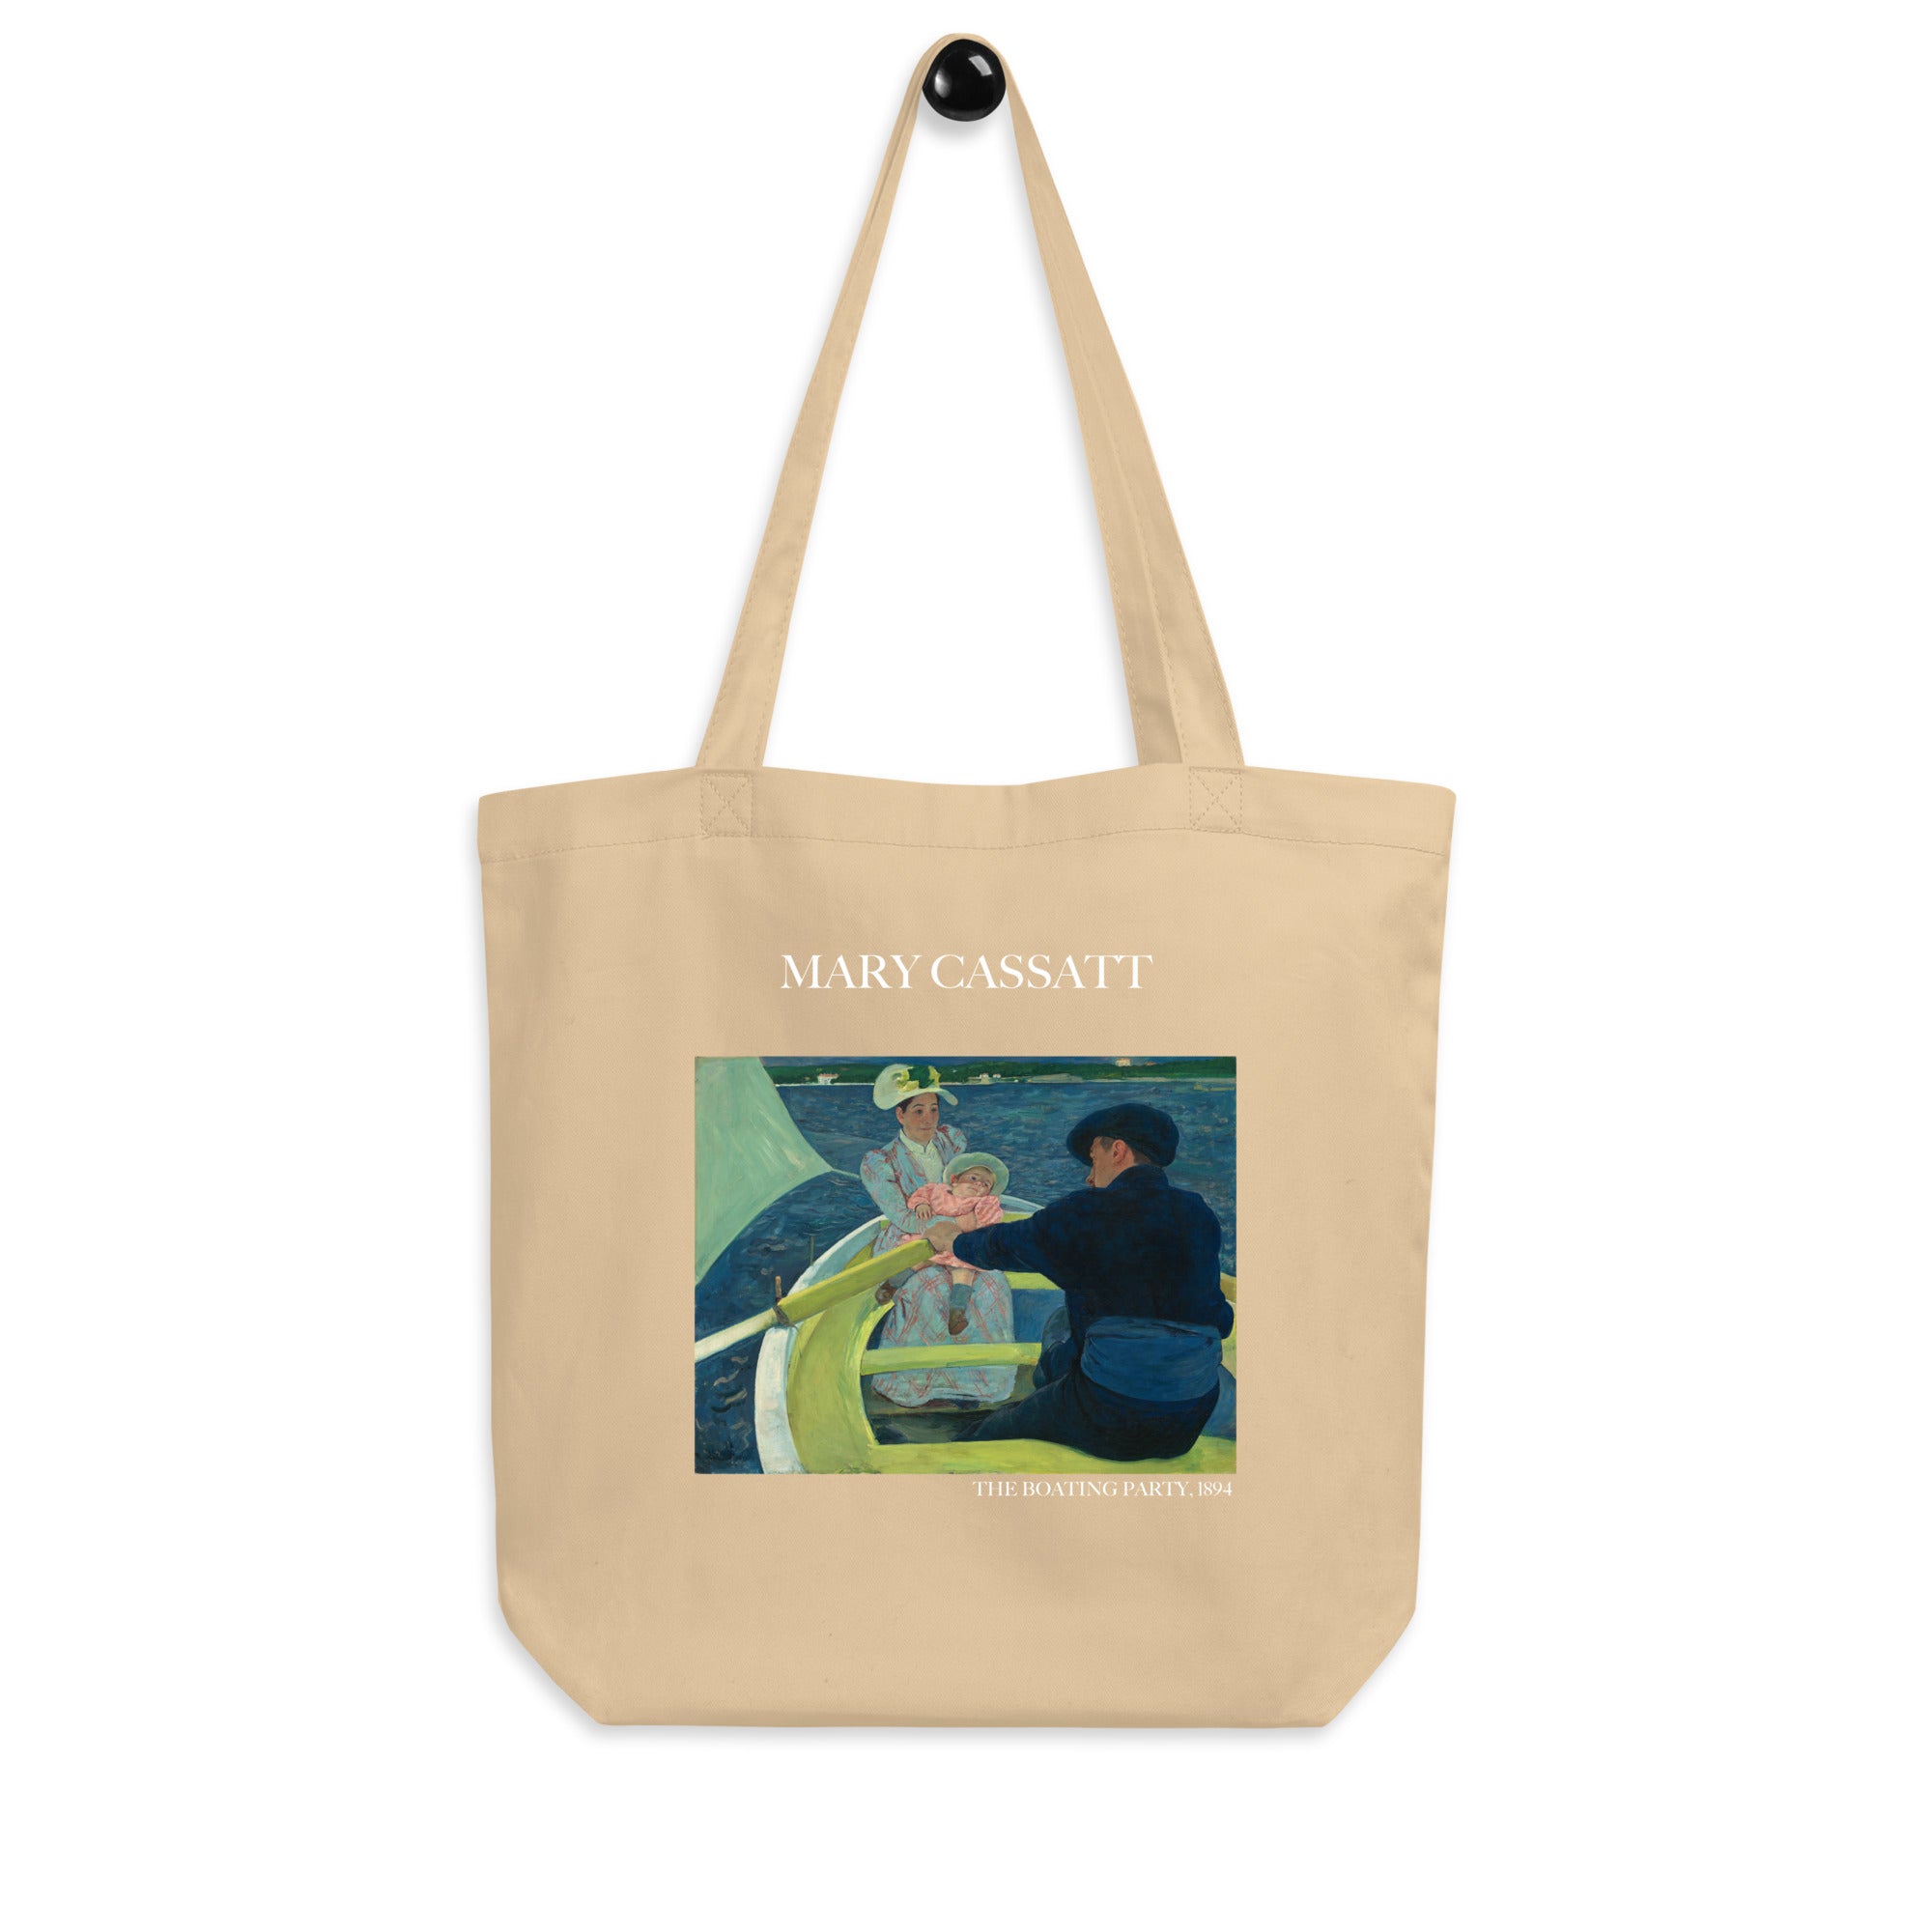 Mary Cassatt 'The Boating Party' Famous Painting Totebag | Eco Friendly Art Tote Bag